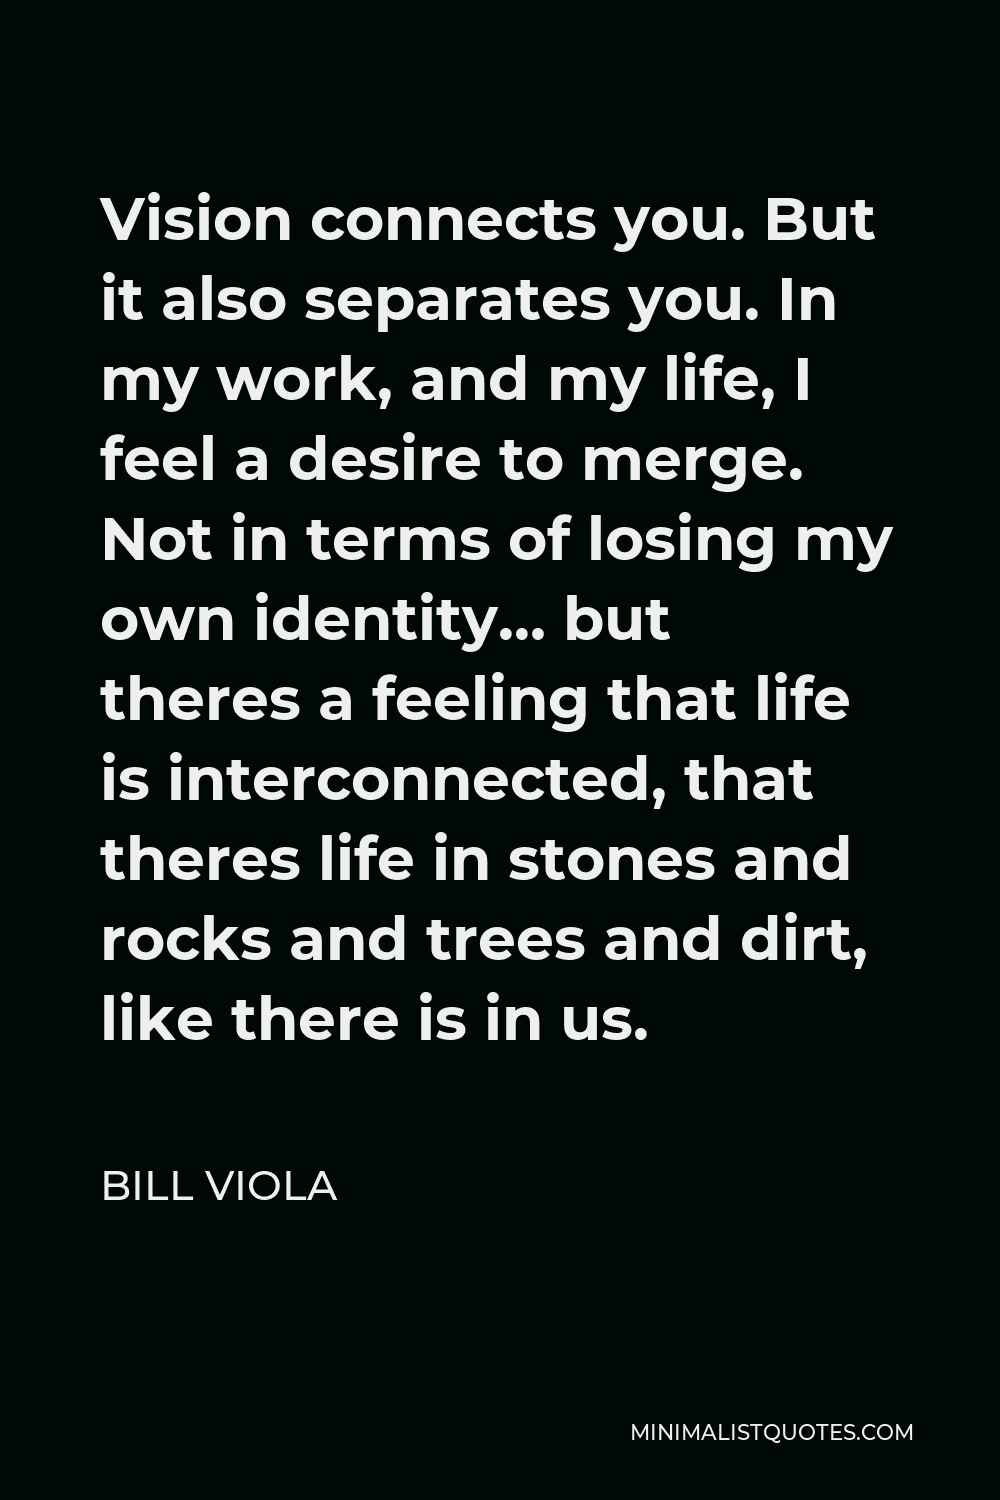 Bill Viola Quote - Vision connects you. But it also separates you. In my work, and my life, I feel a desire to merge. Not in terms of losing my own identity… but theres a feeling that life is interconnected, that theres life in stones and rocks and trees and dirt, like there is in us.